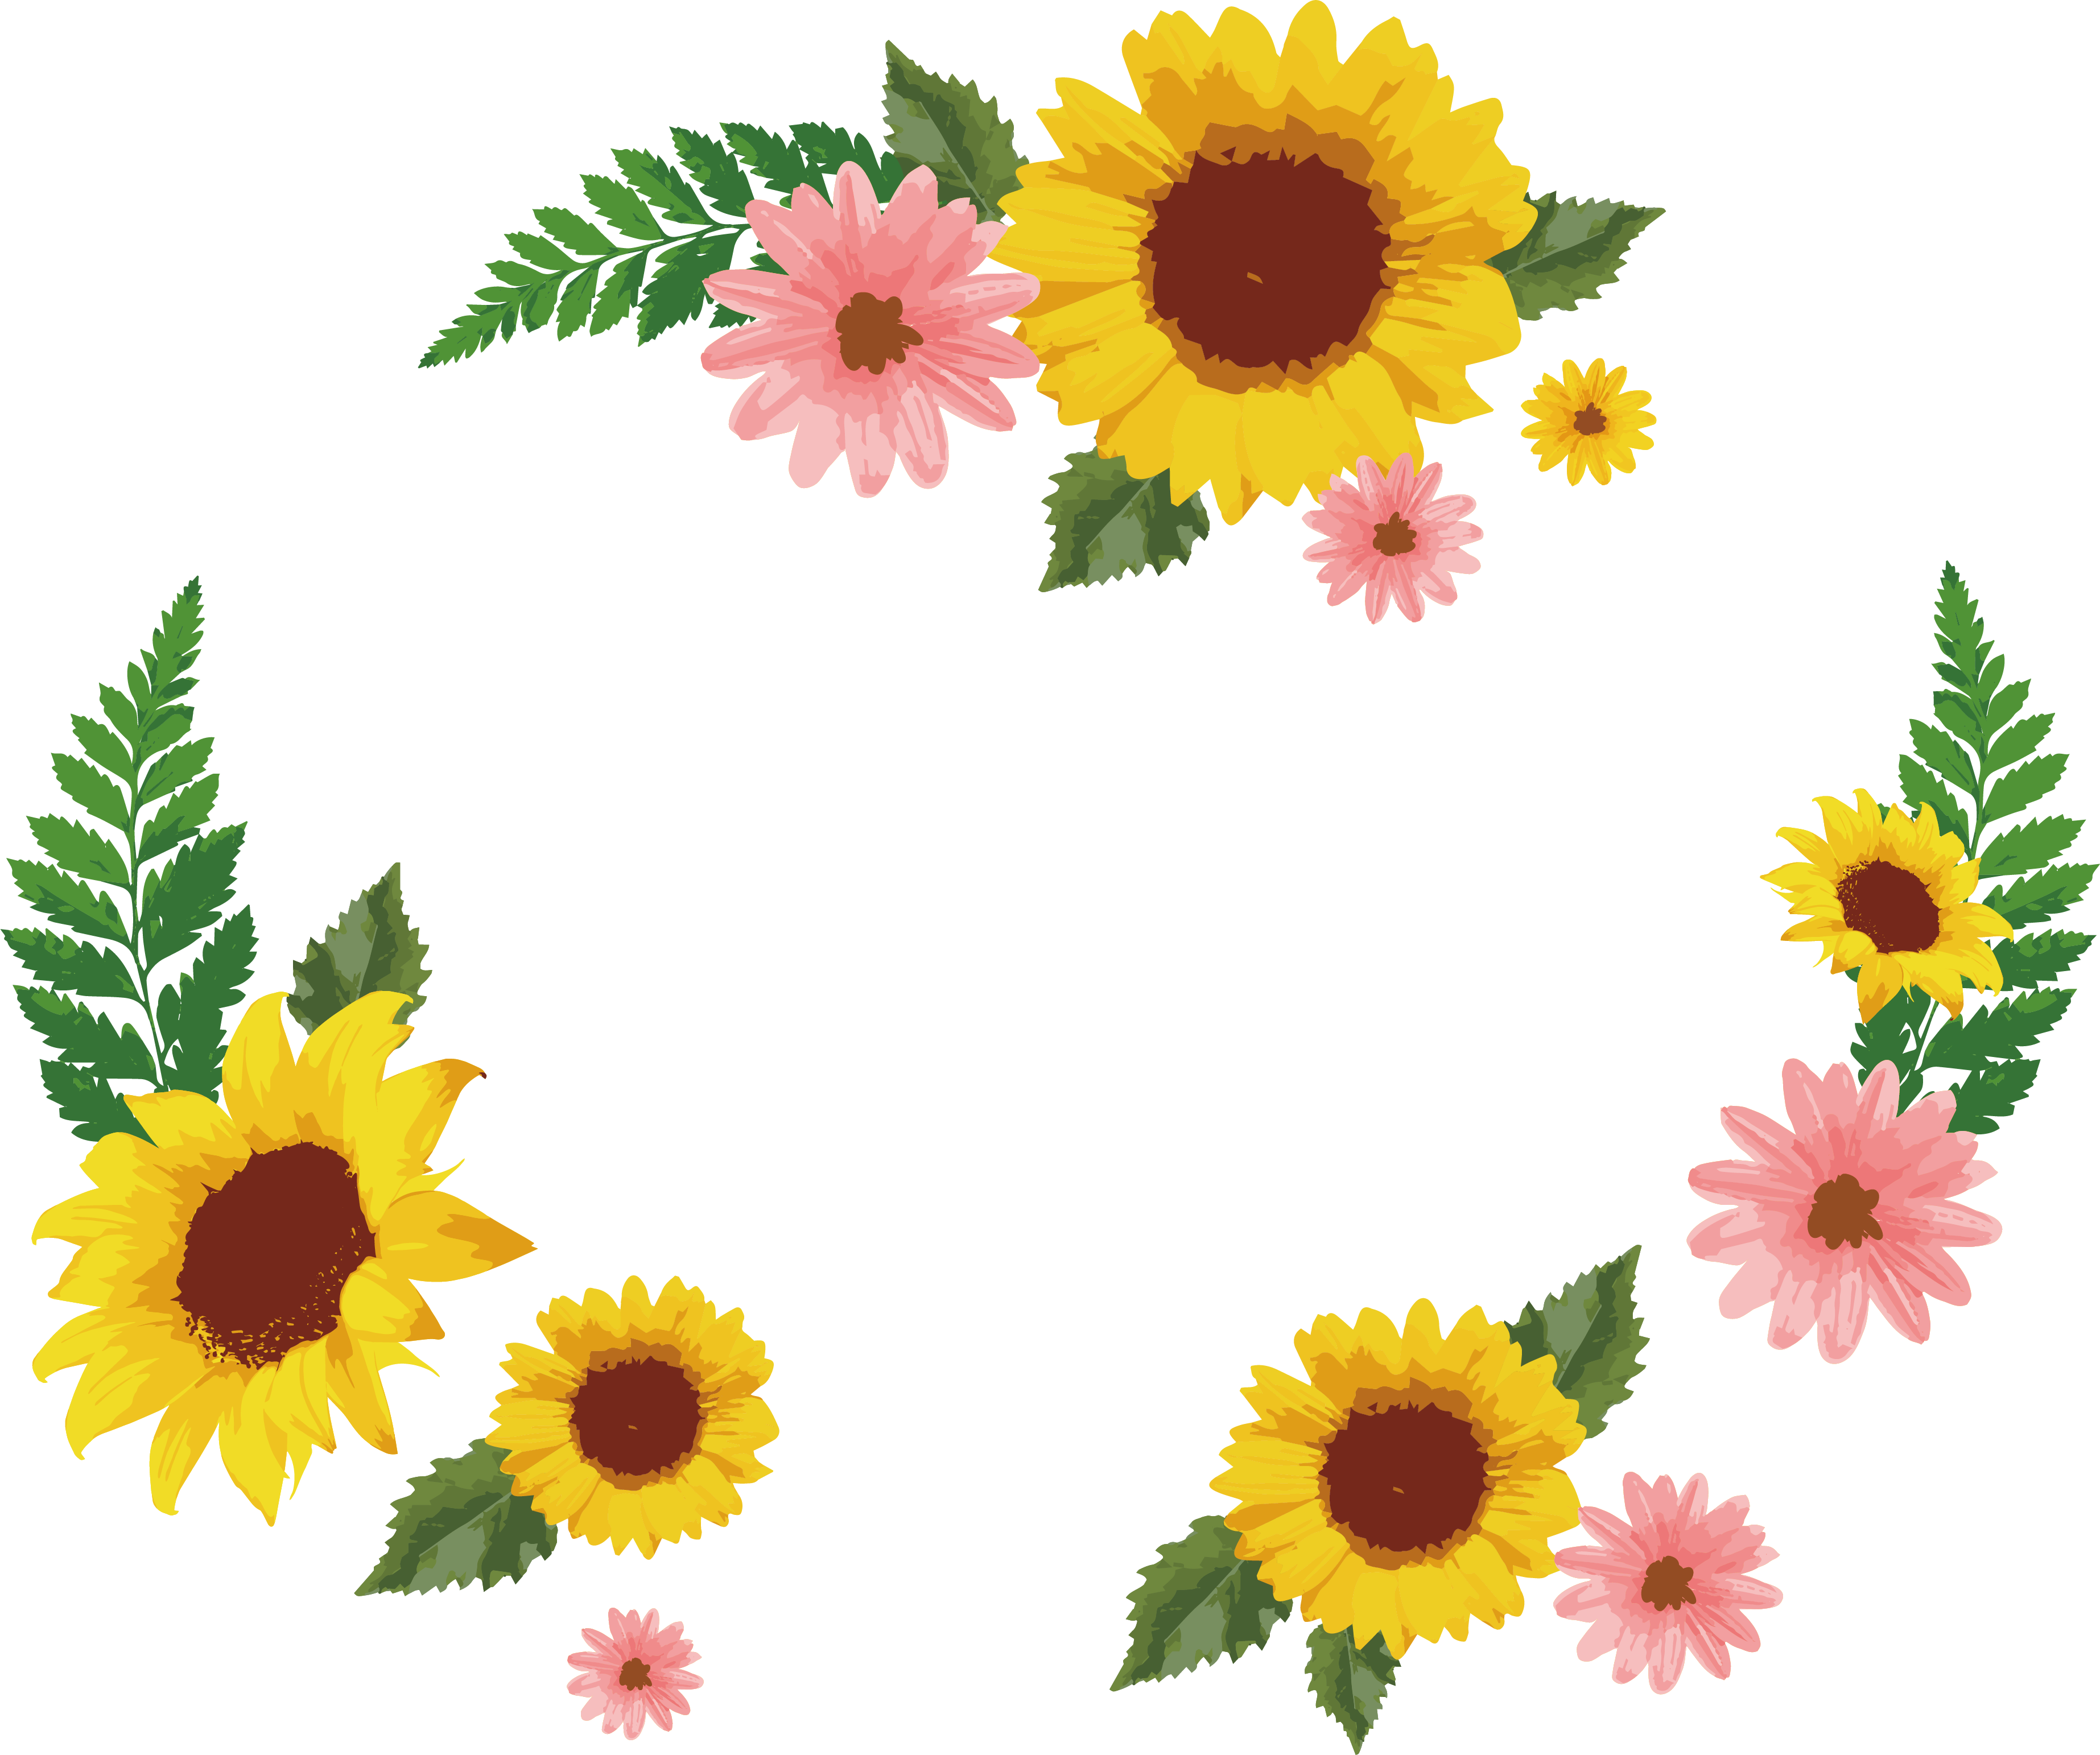 Download Daisy clipart vector, Daisy vector Transparent FREE for ...